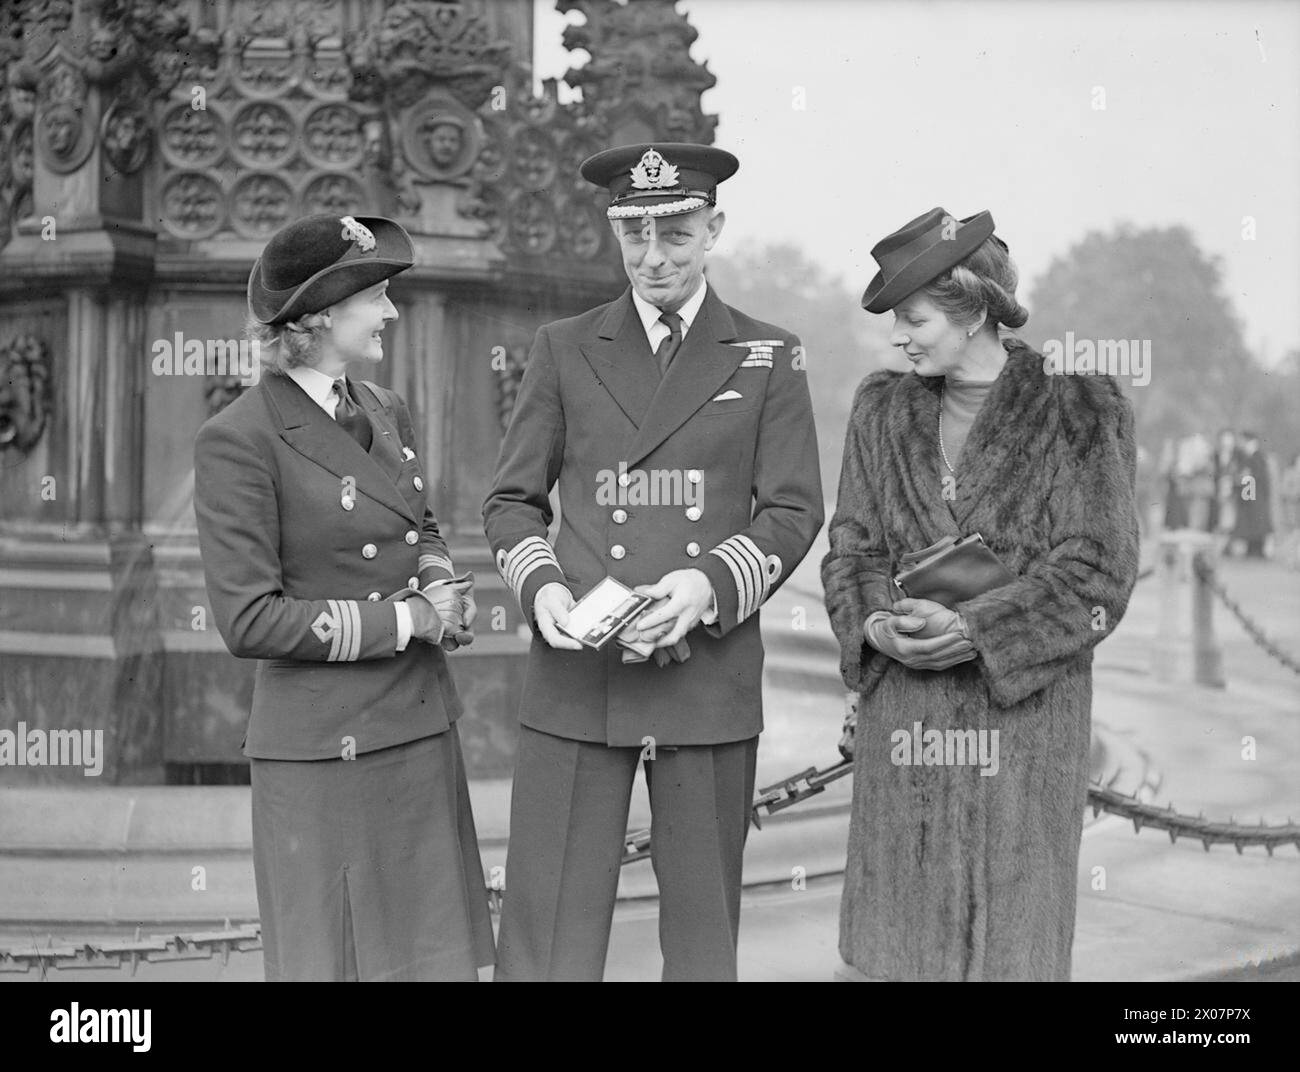 NAVAL HEROES AT HOLYROOD. 26 SEPTEMBER 1945, NAVAL OFFICERS WERE DECORATED BY HM THE KING AT AN INVESTITURE IN HOLYROOD HOUSE, EDINBURGH. - Captain Duncan Hill, RN, of Lemington Spa showing his DSO to his wife, Chief Officer R M Hill, WRNS, and sister-in-law Mrs R R Uprichard of St Andrews Stock Photo